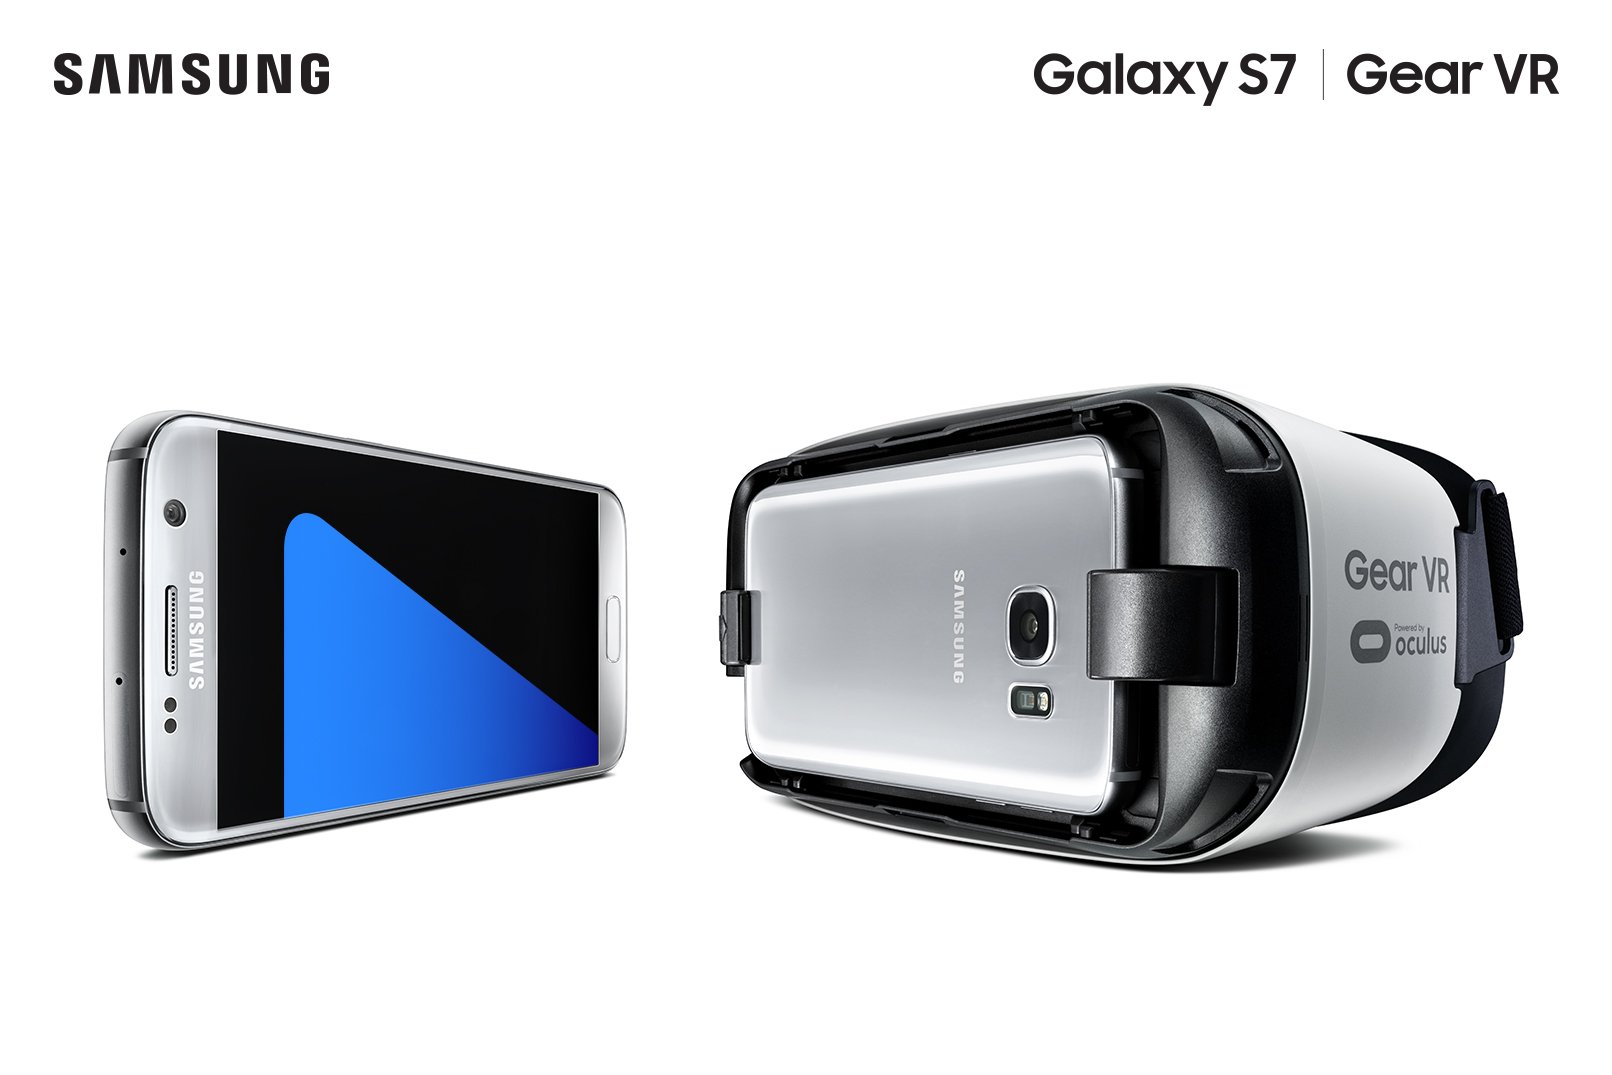 Netjes Observatie Betreffende Samsung Mobile on Twitter: "#GalaxyS7 &amp; #GalaxyS7edge in stores March  11. Limited bundle offer of #GearVR with preorder in select countries.  https://t.co/nHARmoc3Pw" / Twitter